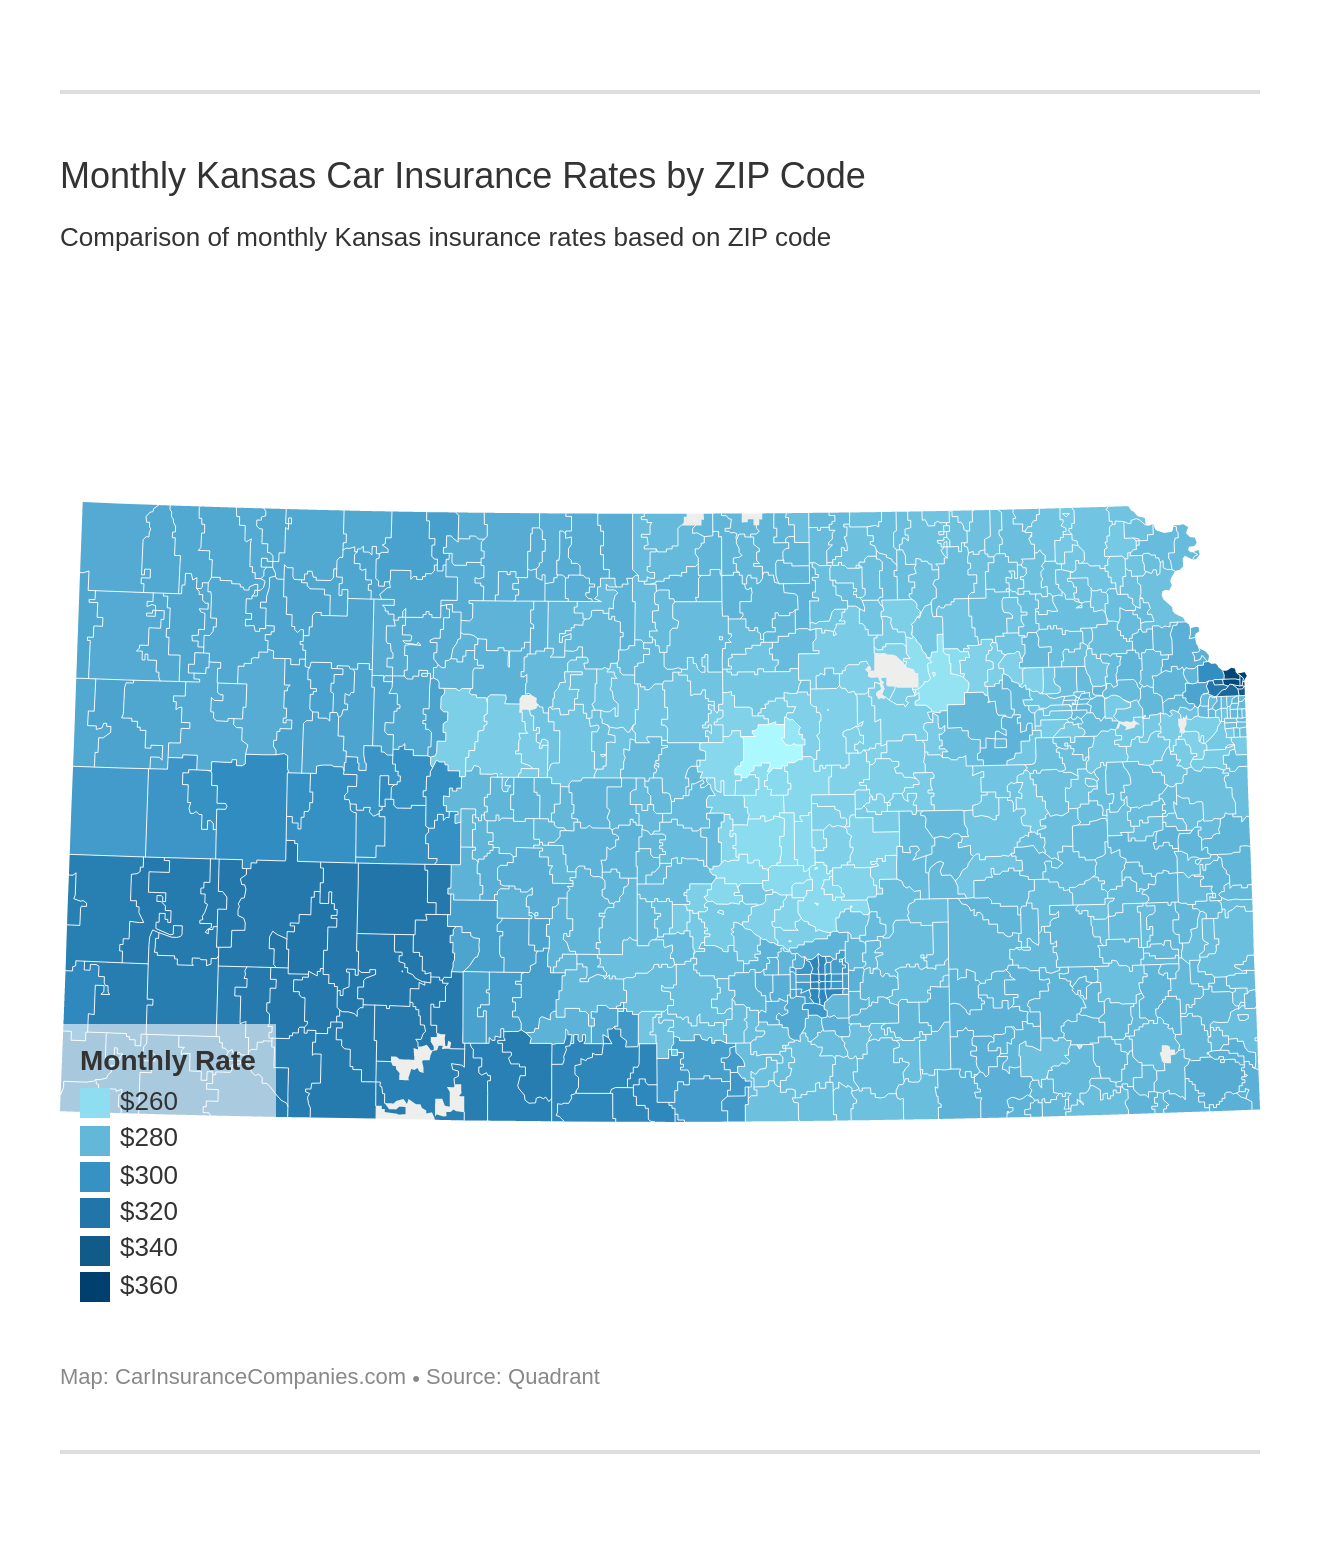 Monthly Kansas Car Insurance Rates by ZIP Code